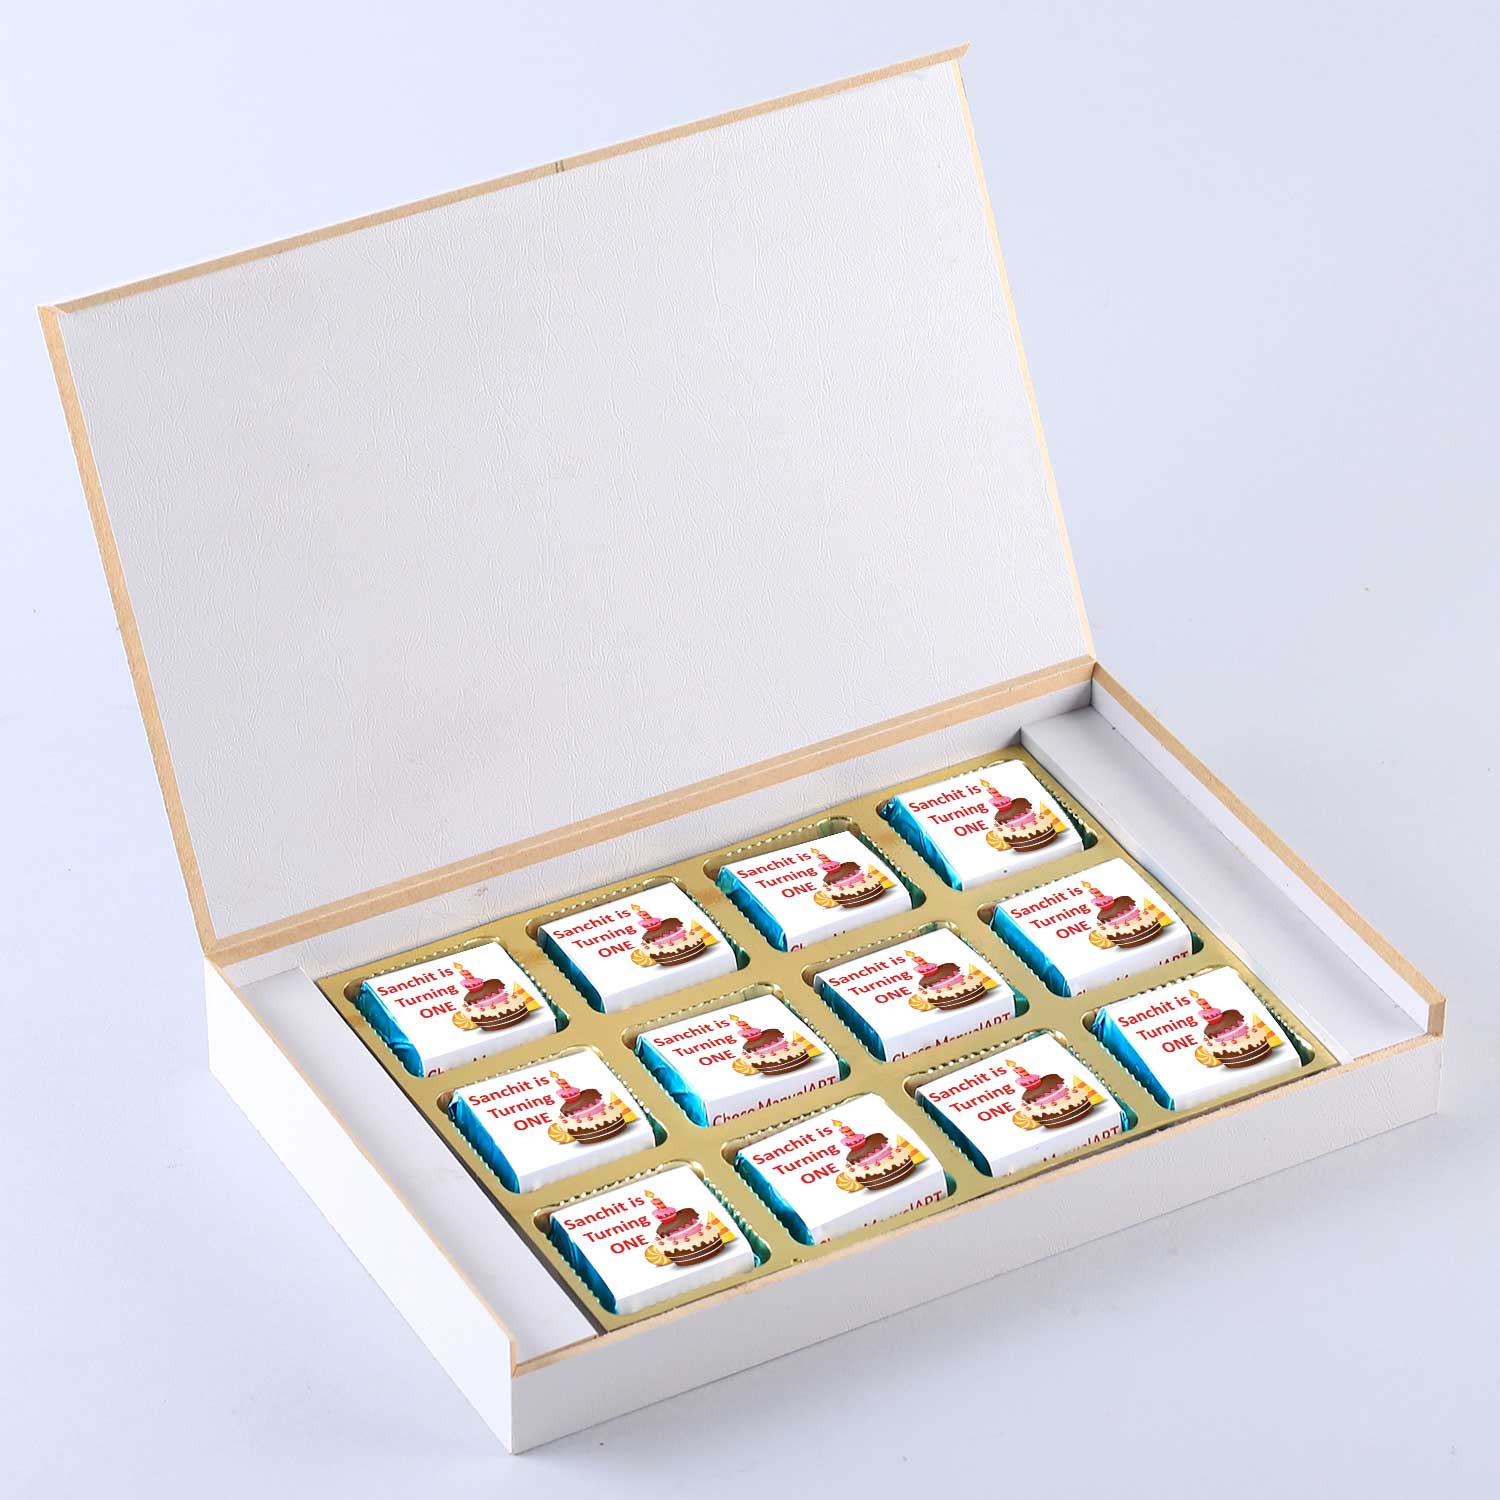 customized white wooden box with a wrapper of all-printed chocolates. There is also a personalized message printed on Message paper inside the box.